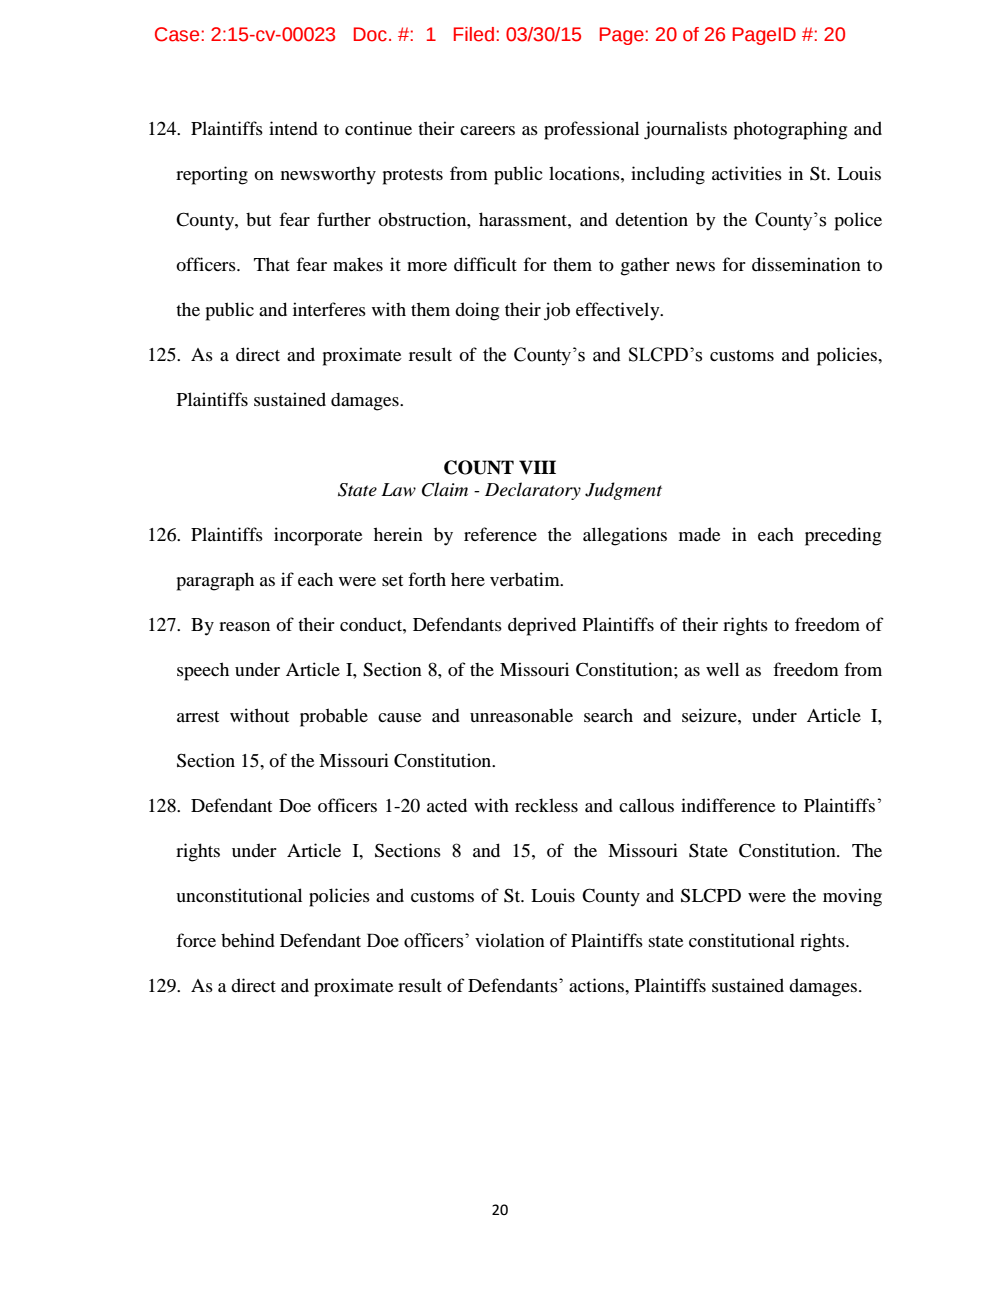 Page 20 from Complaint by <em>Intercept</em> Journalist Against St. Louis Police and County